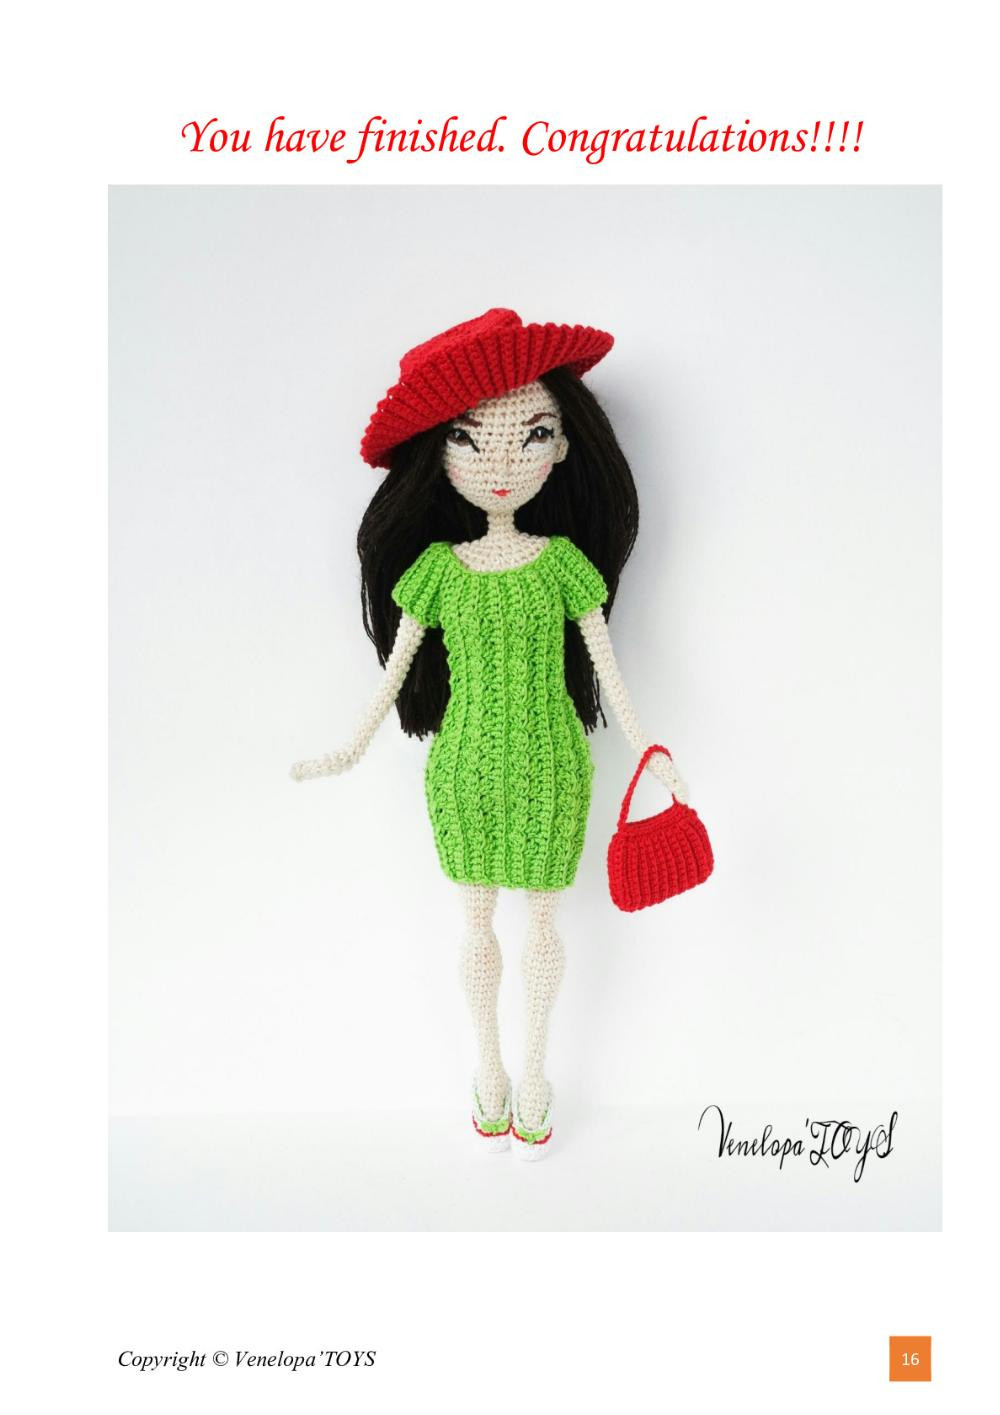 Pattern "Green dress, ballet shoes, hat and bag for dolls Jessica"